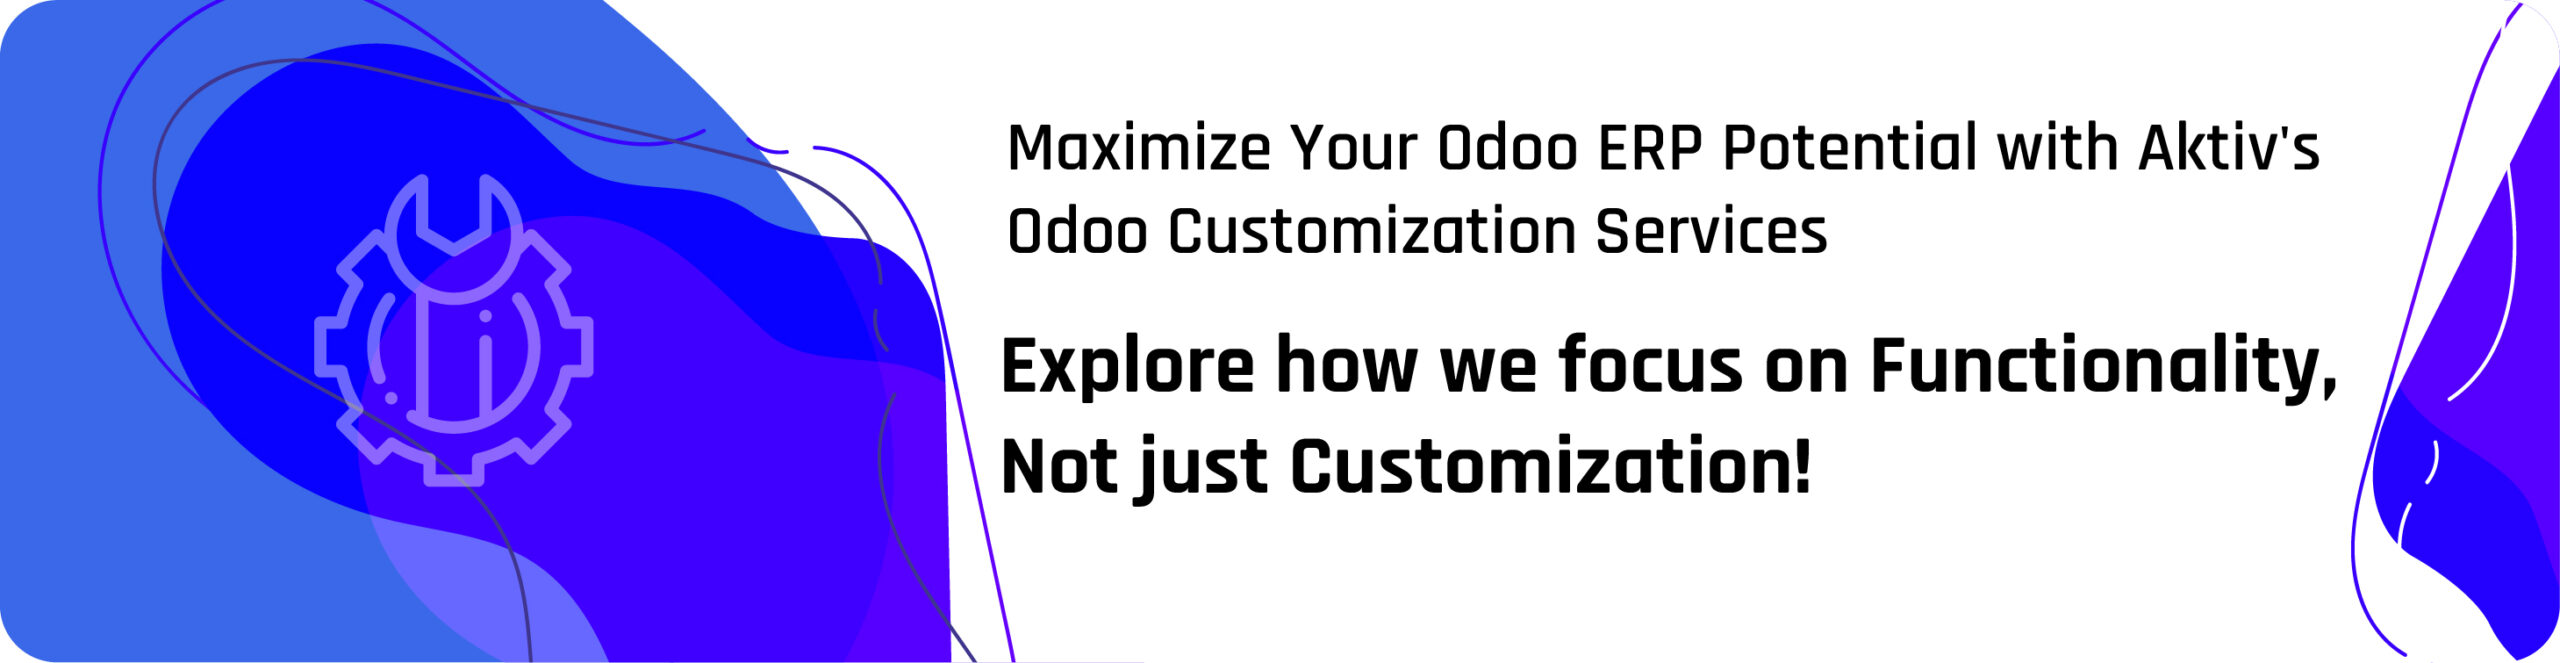 Odoo ERP Customization Services from Aktiv